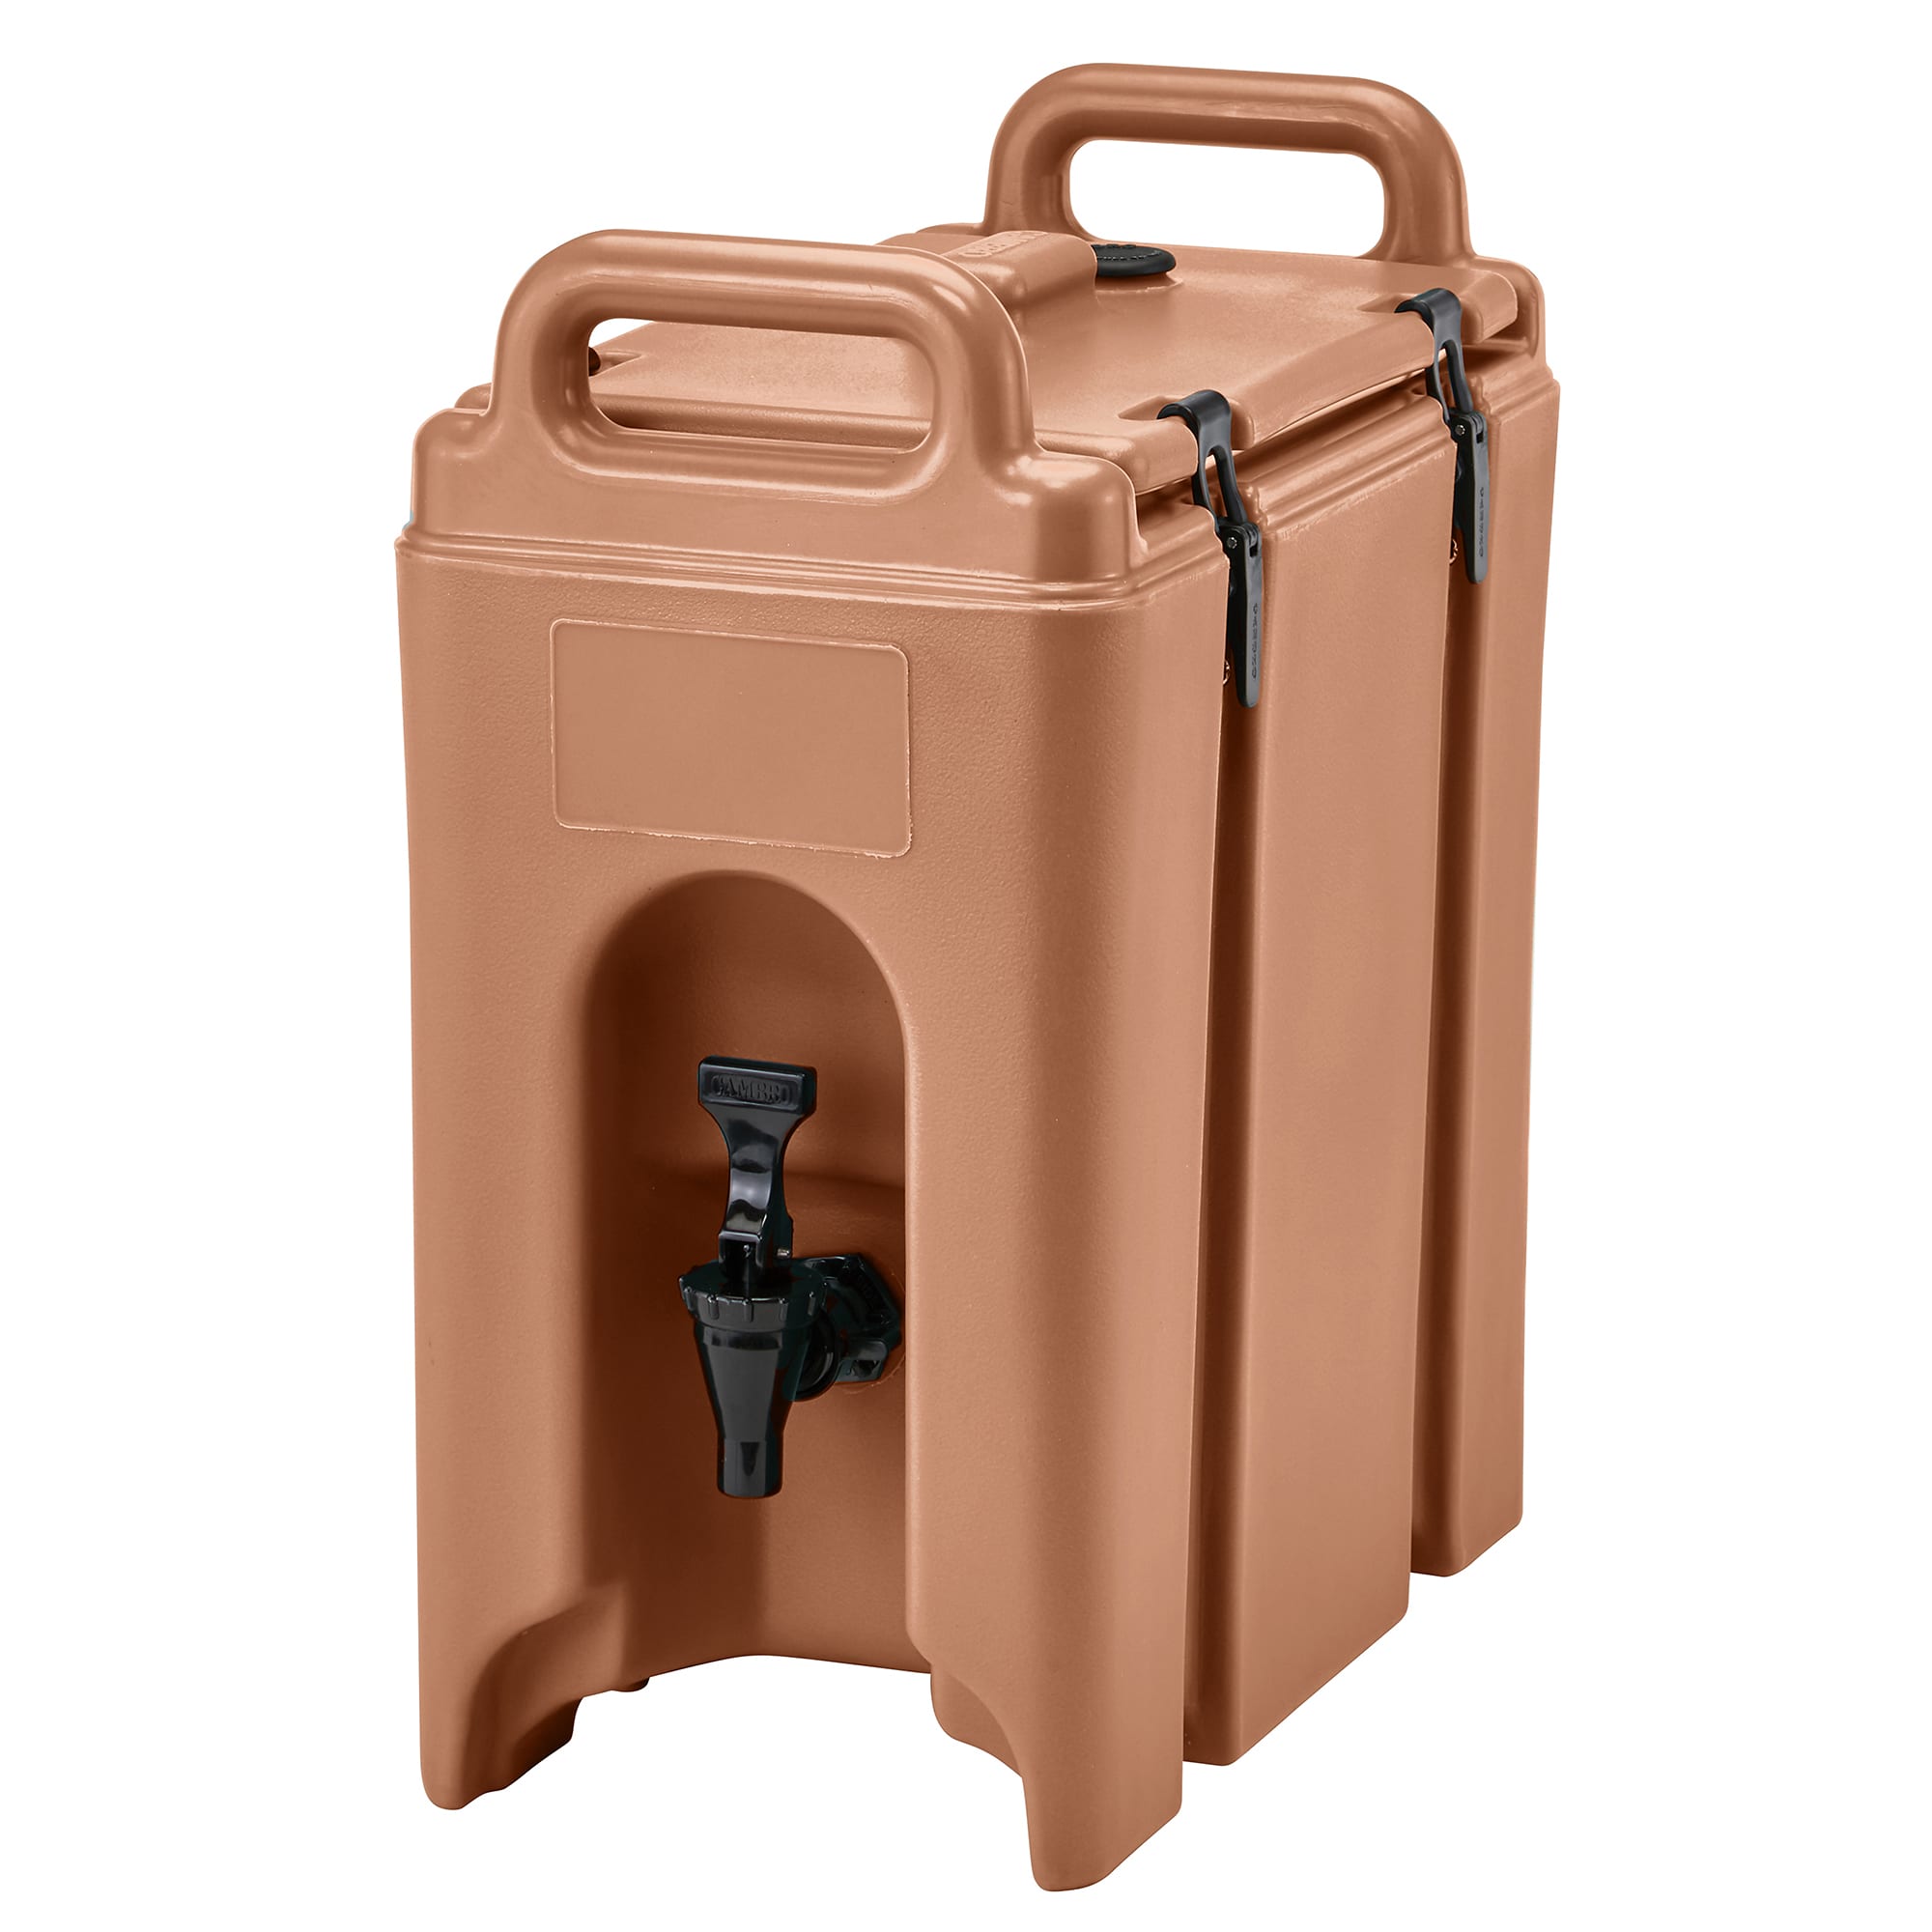 Cambro 250LCD157 Camtainer Beige 2.5 Gal. Insulated Beverage Camtainer